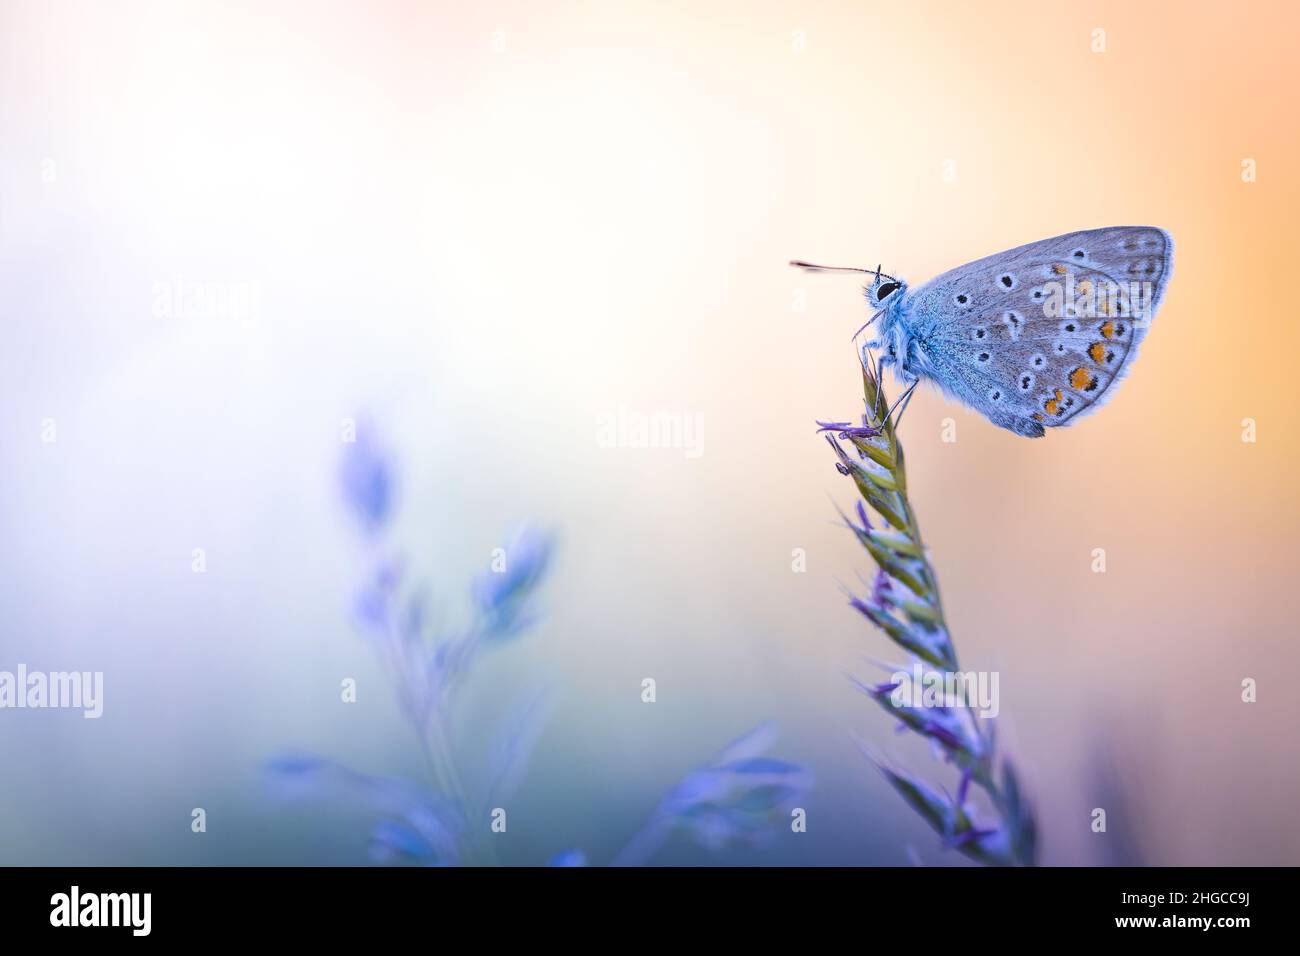 Wonderful world of insects Stock Photo